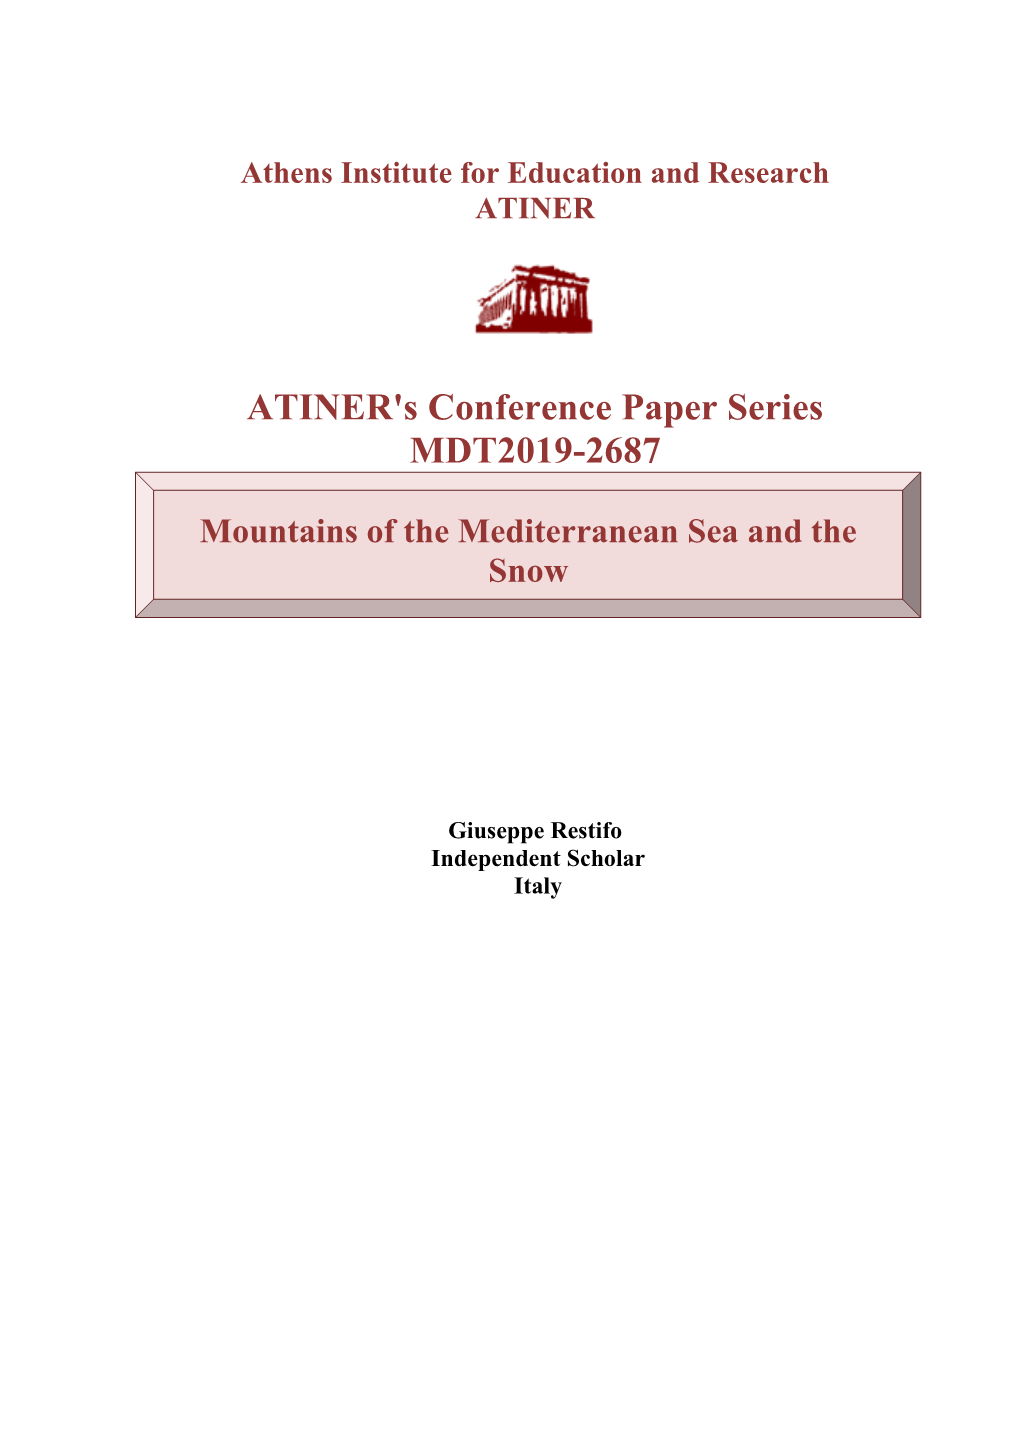 ATINER's Conference Paper Series MDT2019-2687